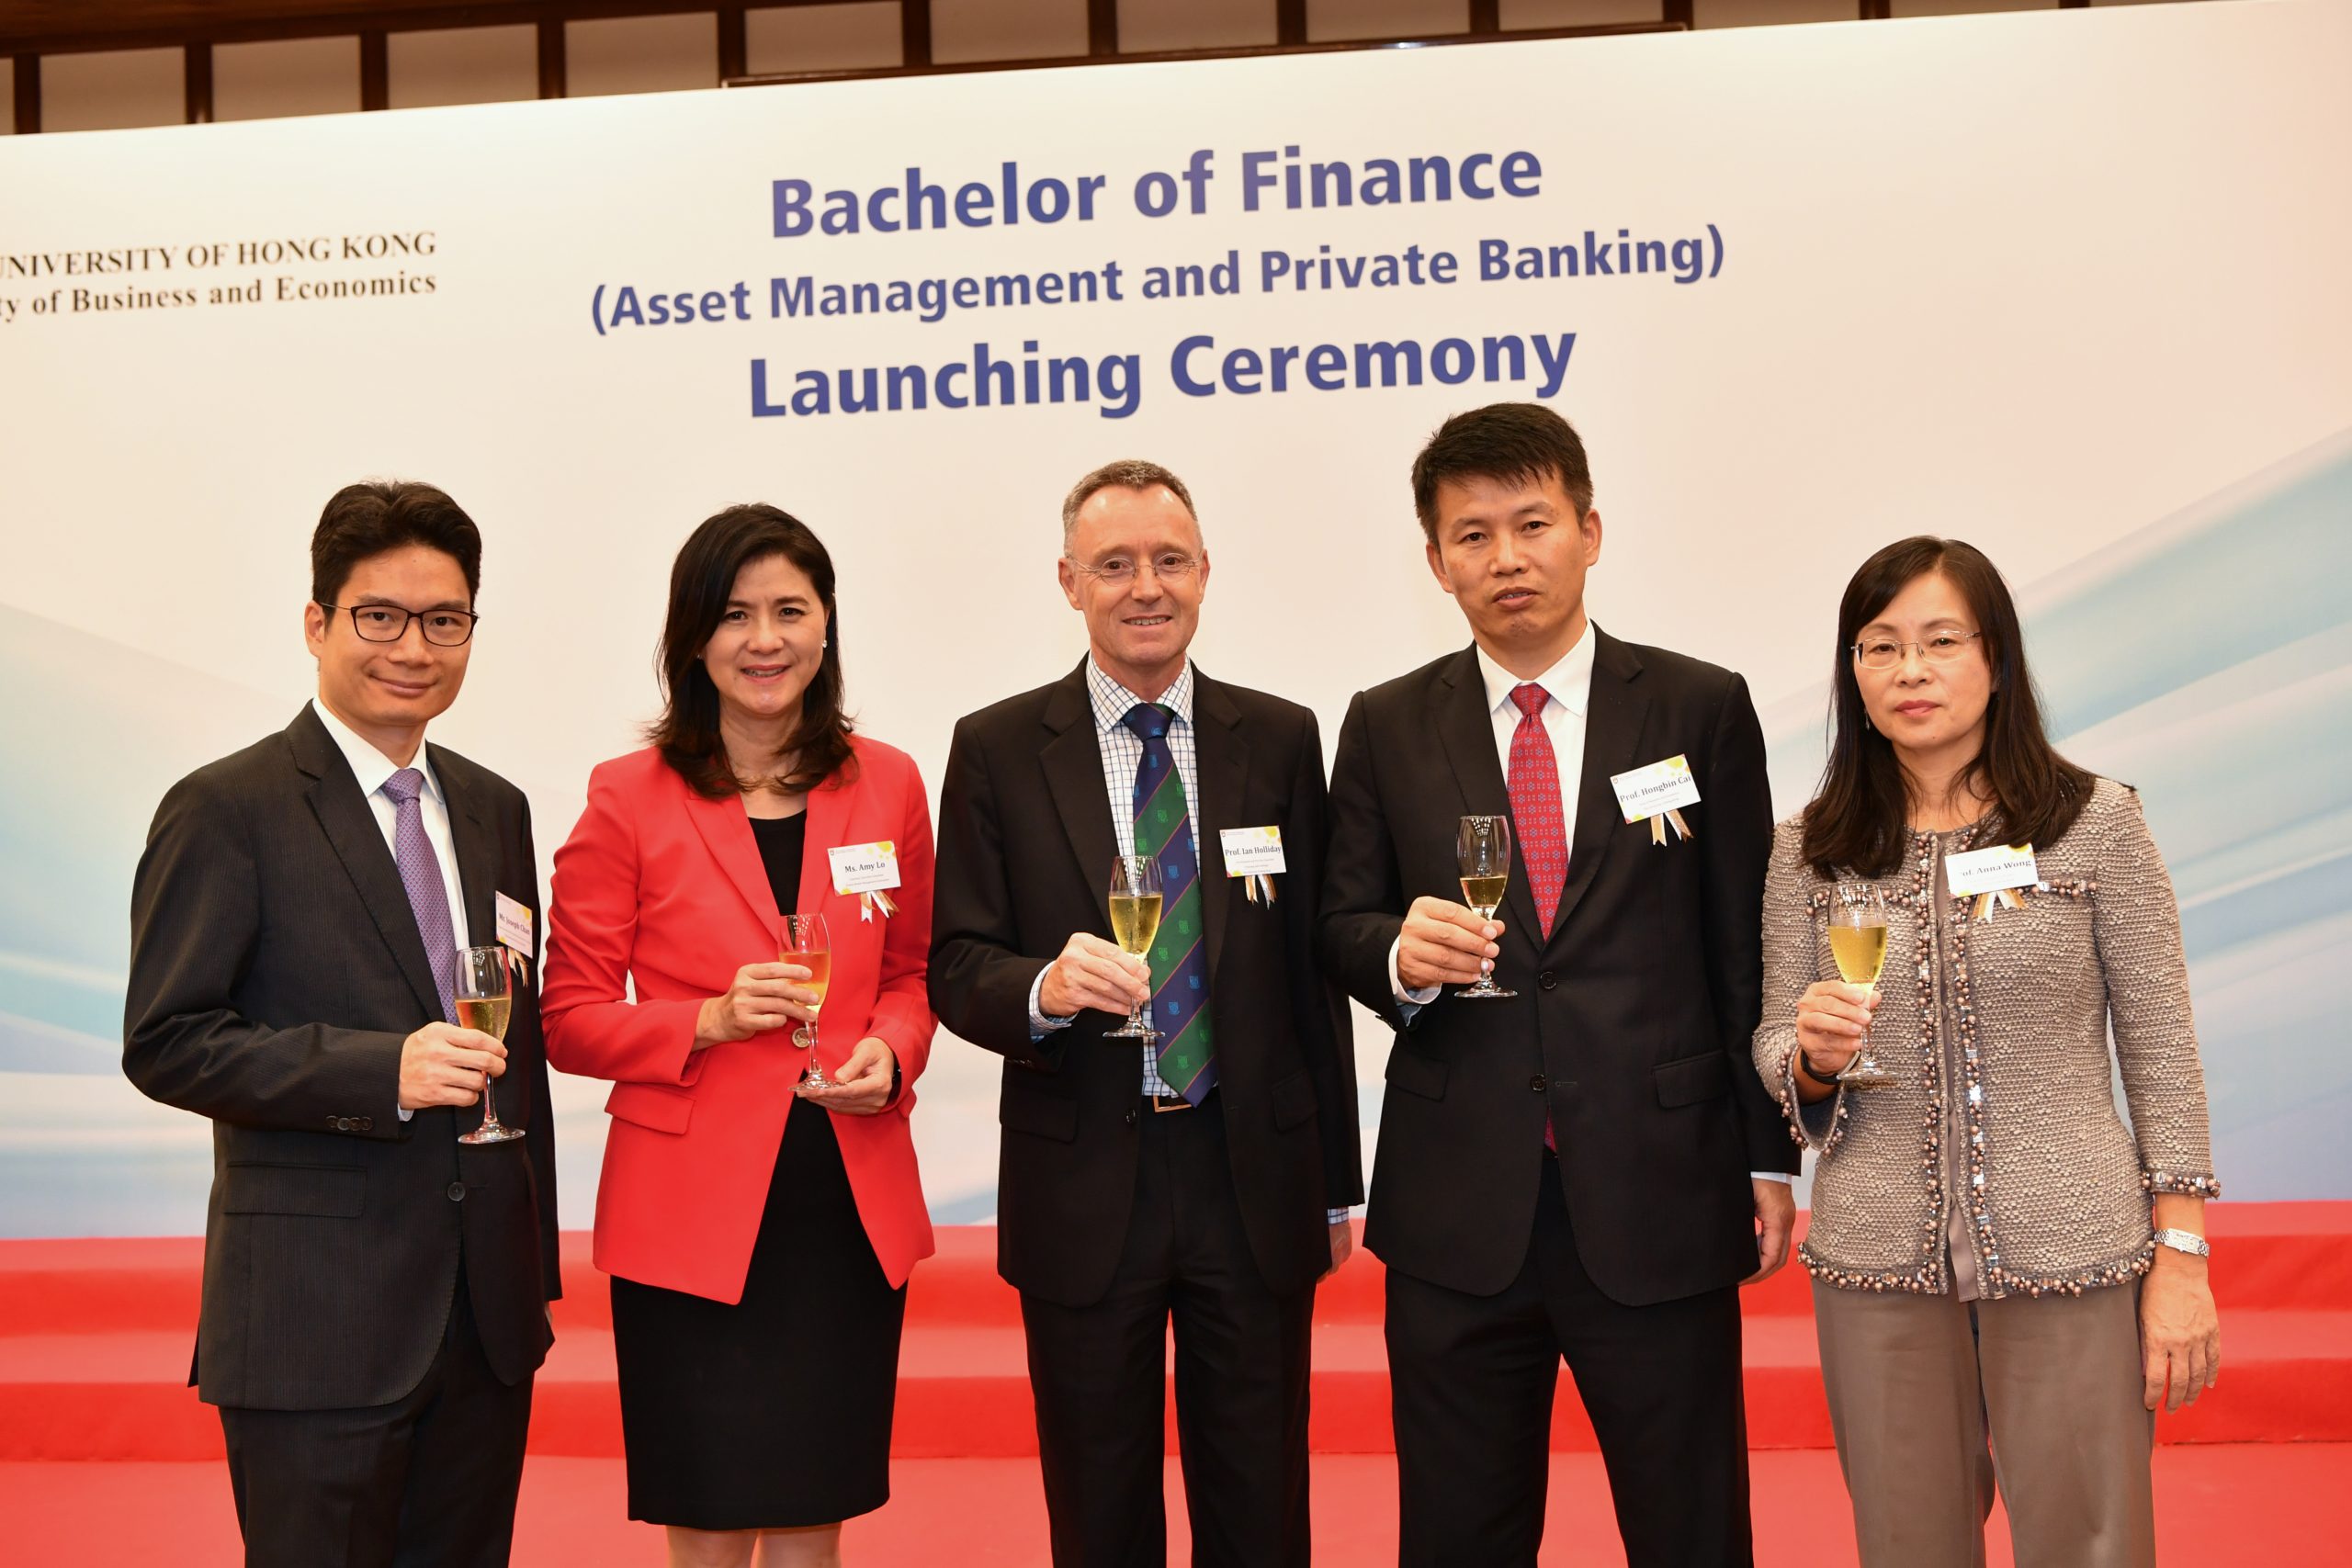 Bachelor of Finance (Asset Management and Private Banking) Launching Ceremony